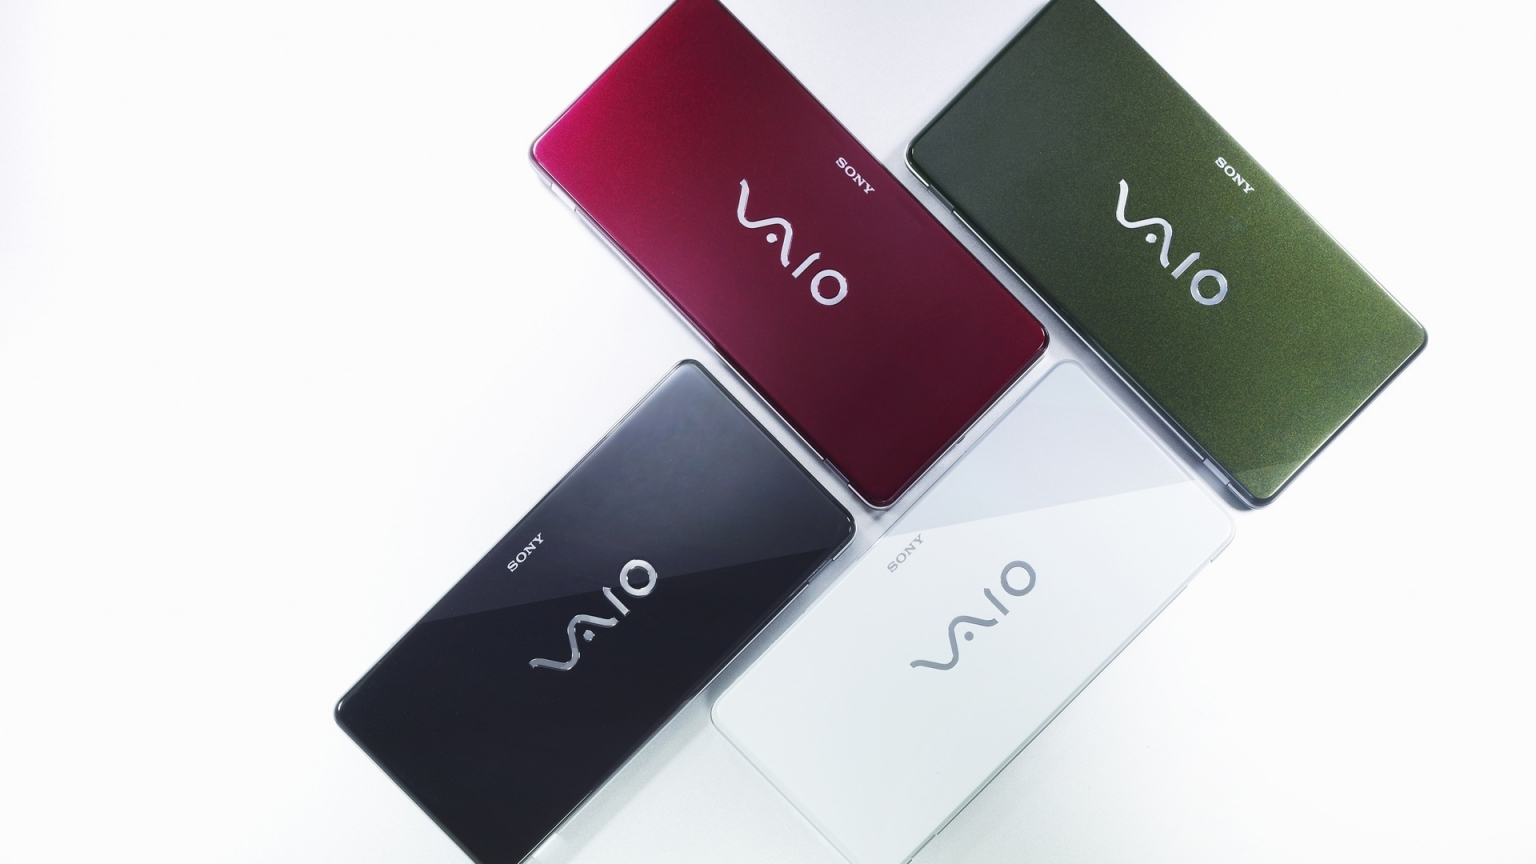 Sony Vaio 4 Colors Game 1536 X 864 Hdtv Wallpaper